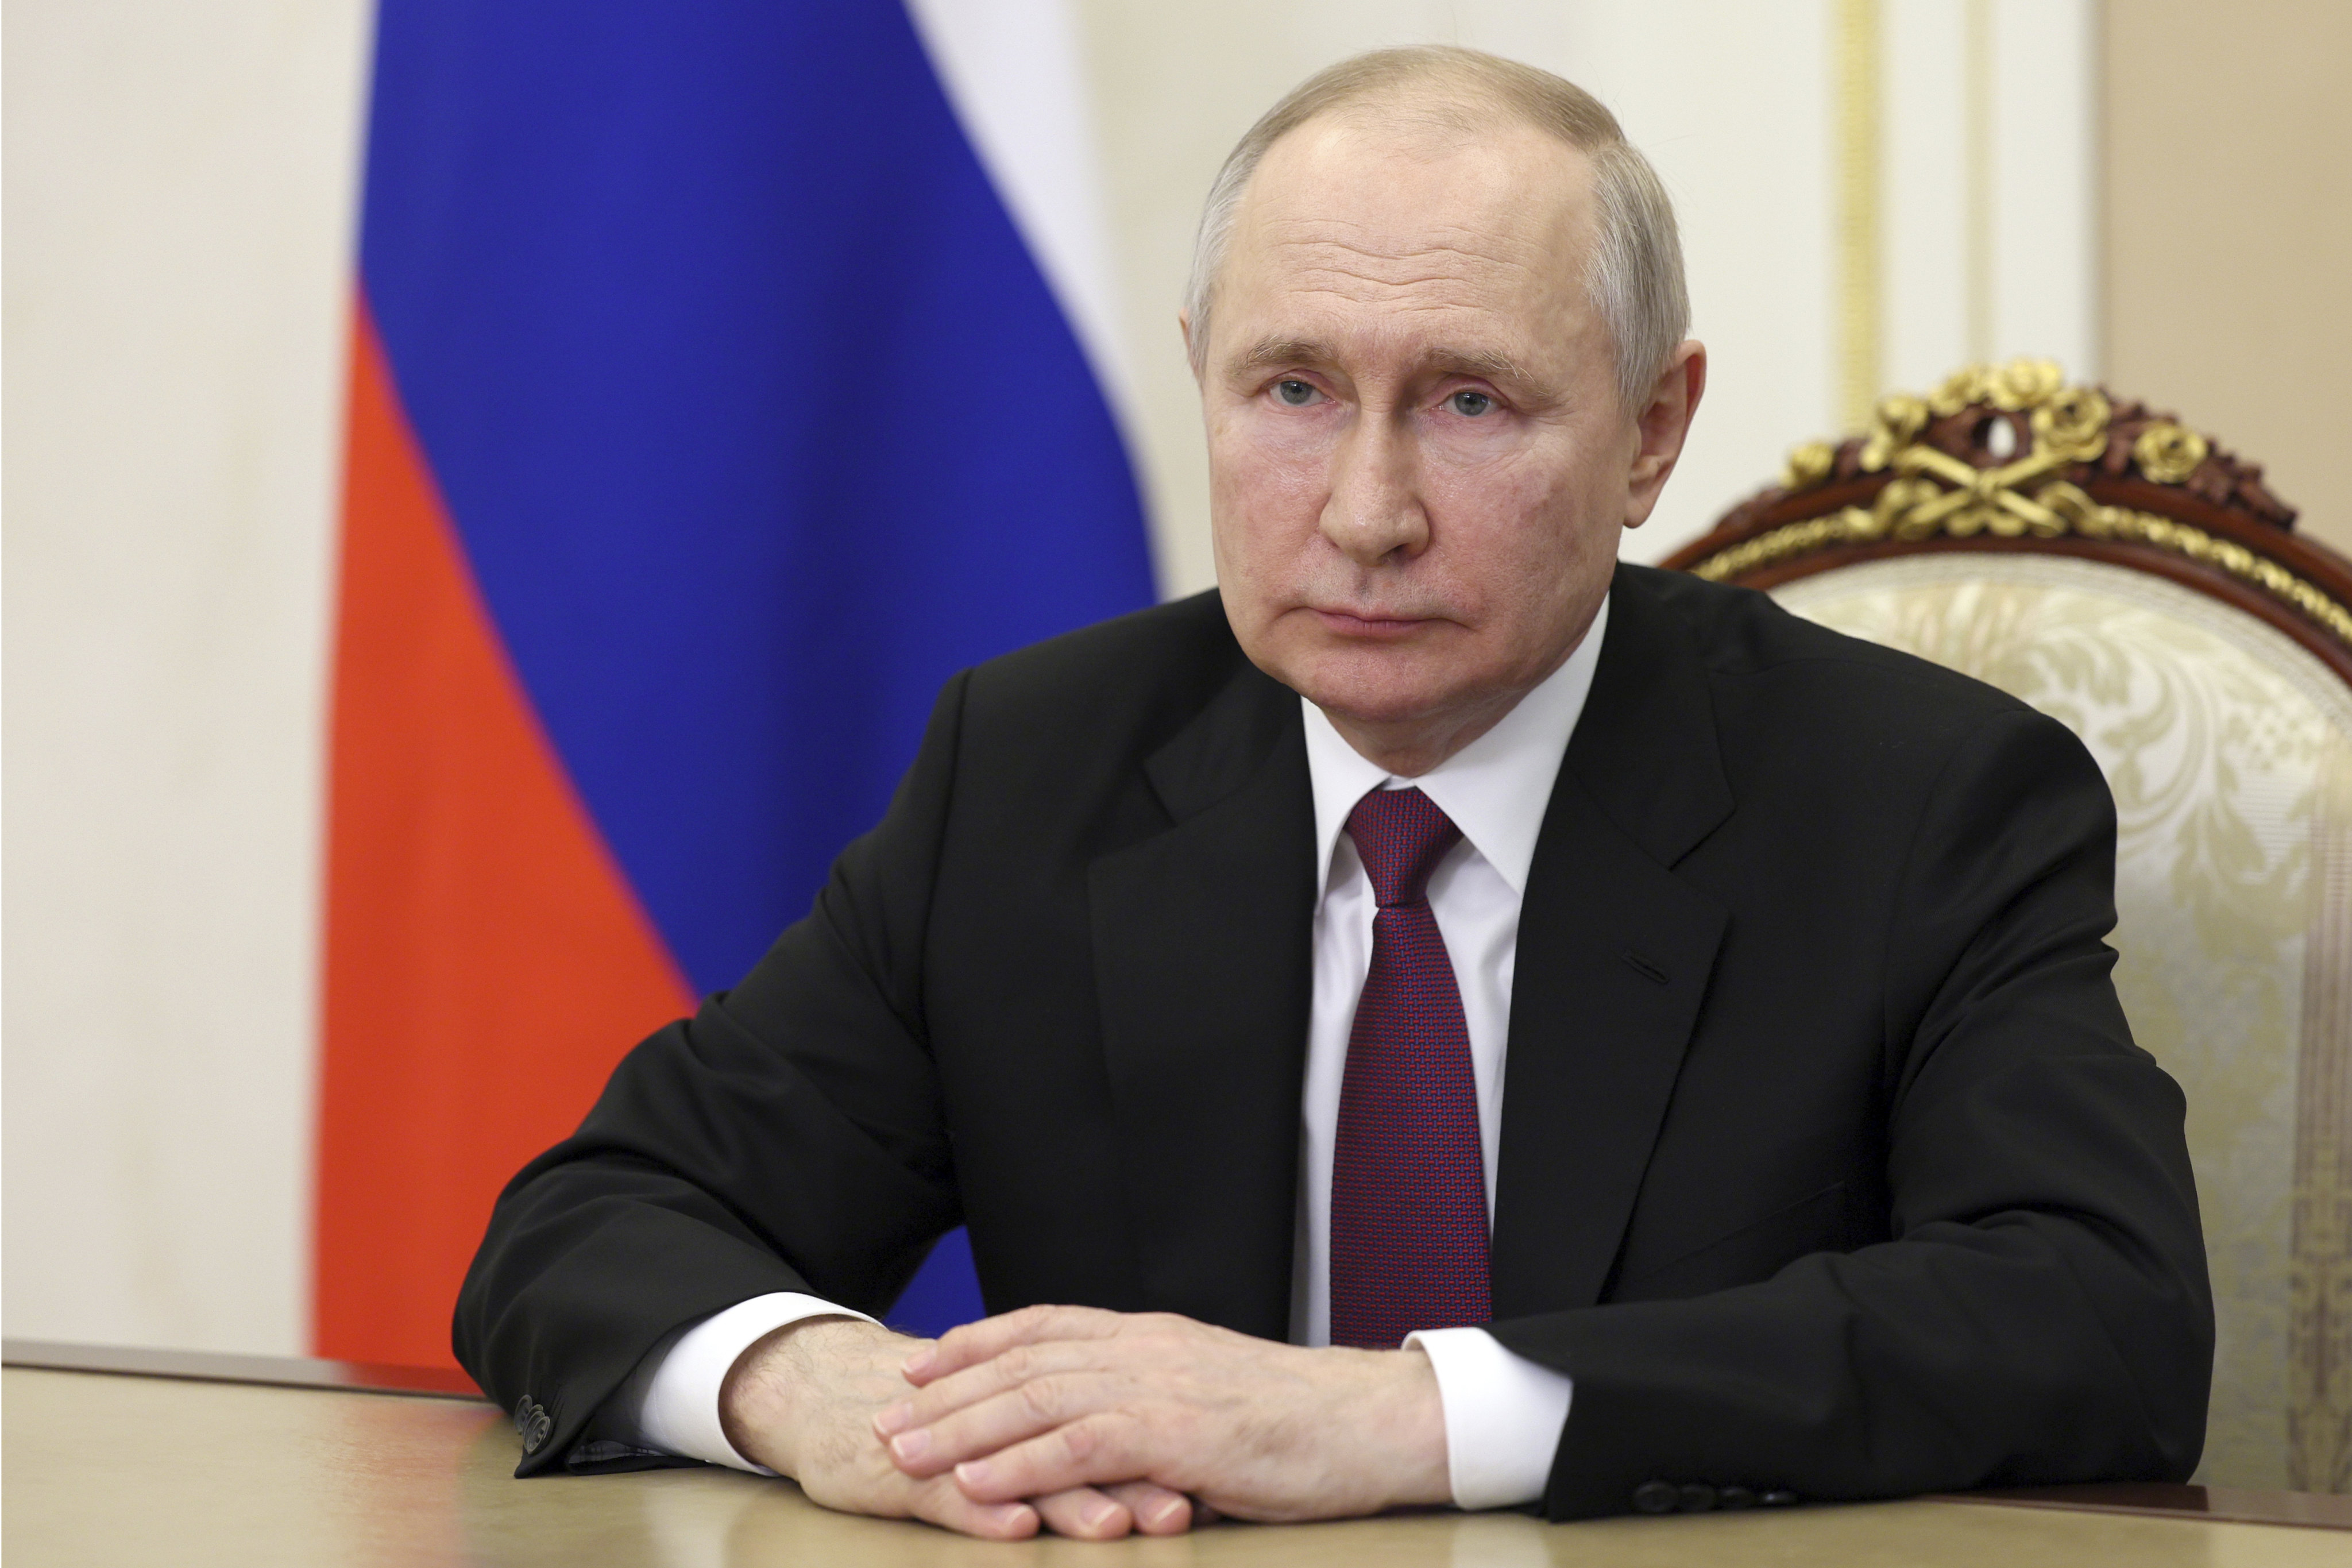 Neither Russia nor South Africa have confirmed whether Russian President Vladimir Putin will attend the BRICS leaders’ summit in Johannesburg on August 22-24 but China is nevertheless discussing security arrangements in the lead-up to the meeting. Photo: Sputnik